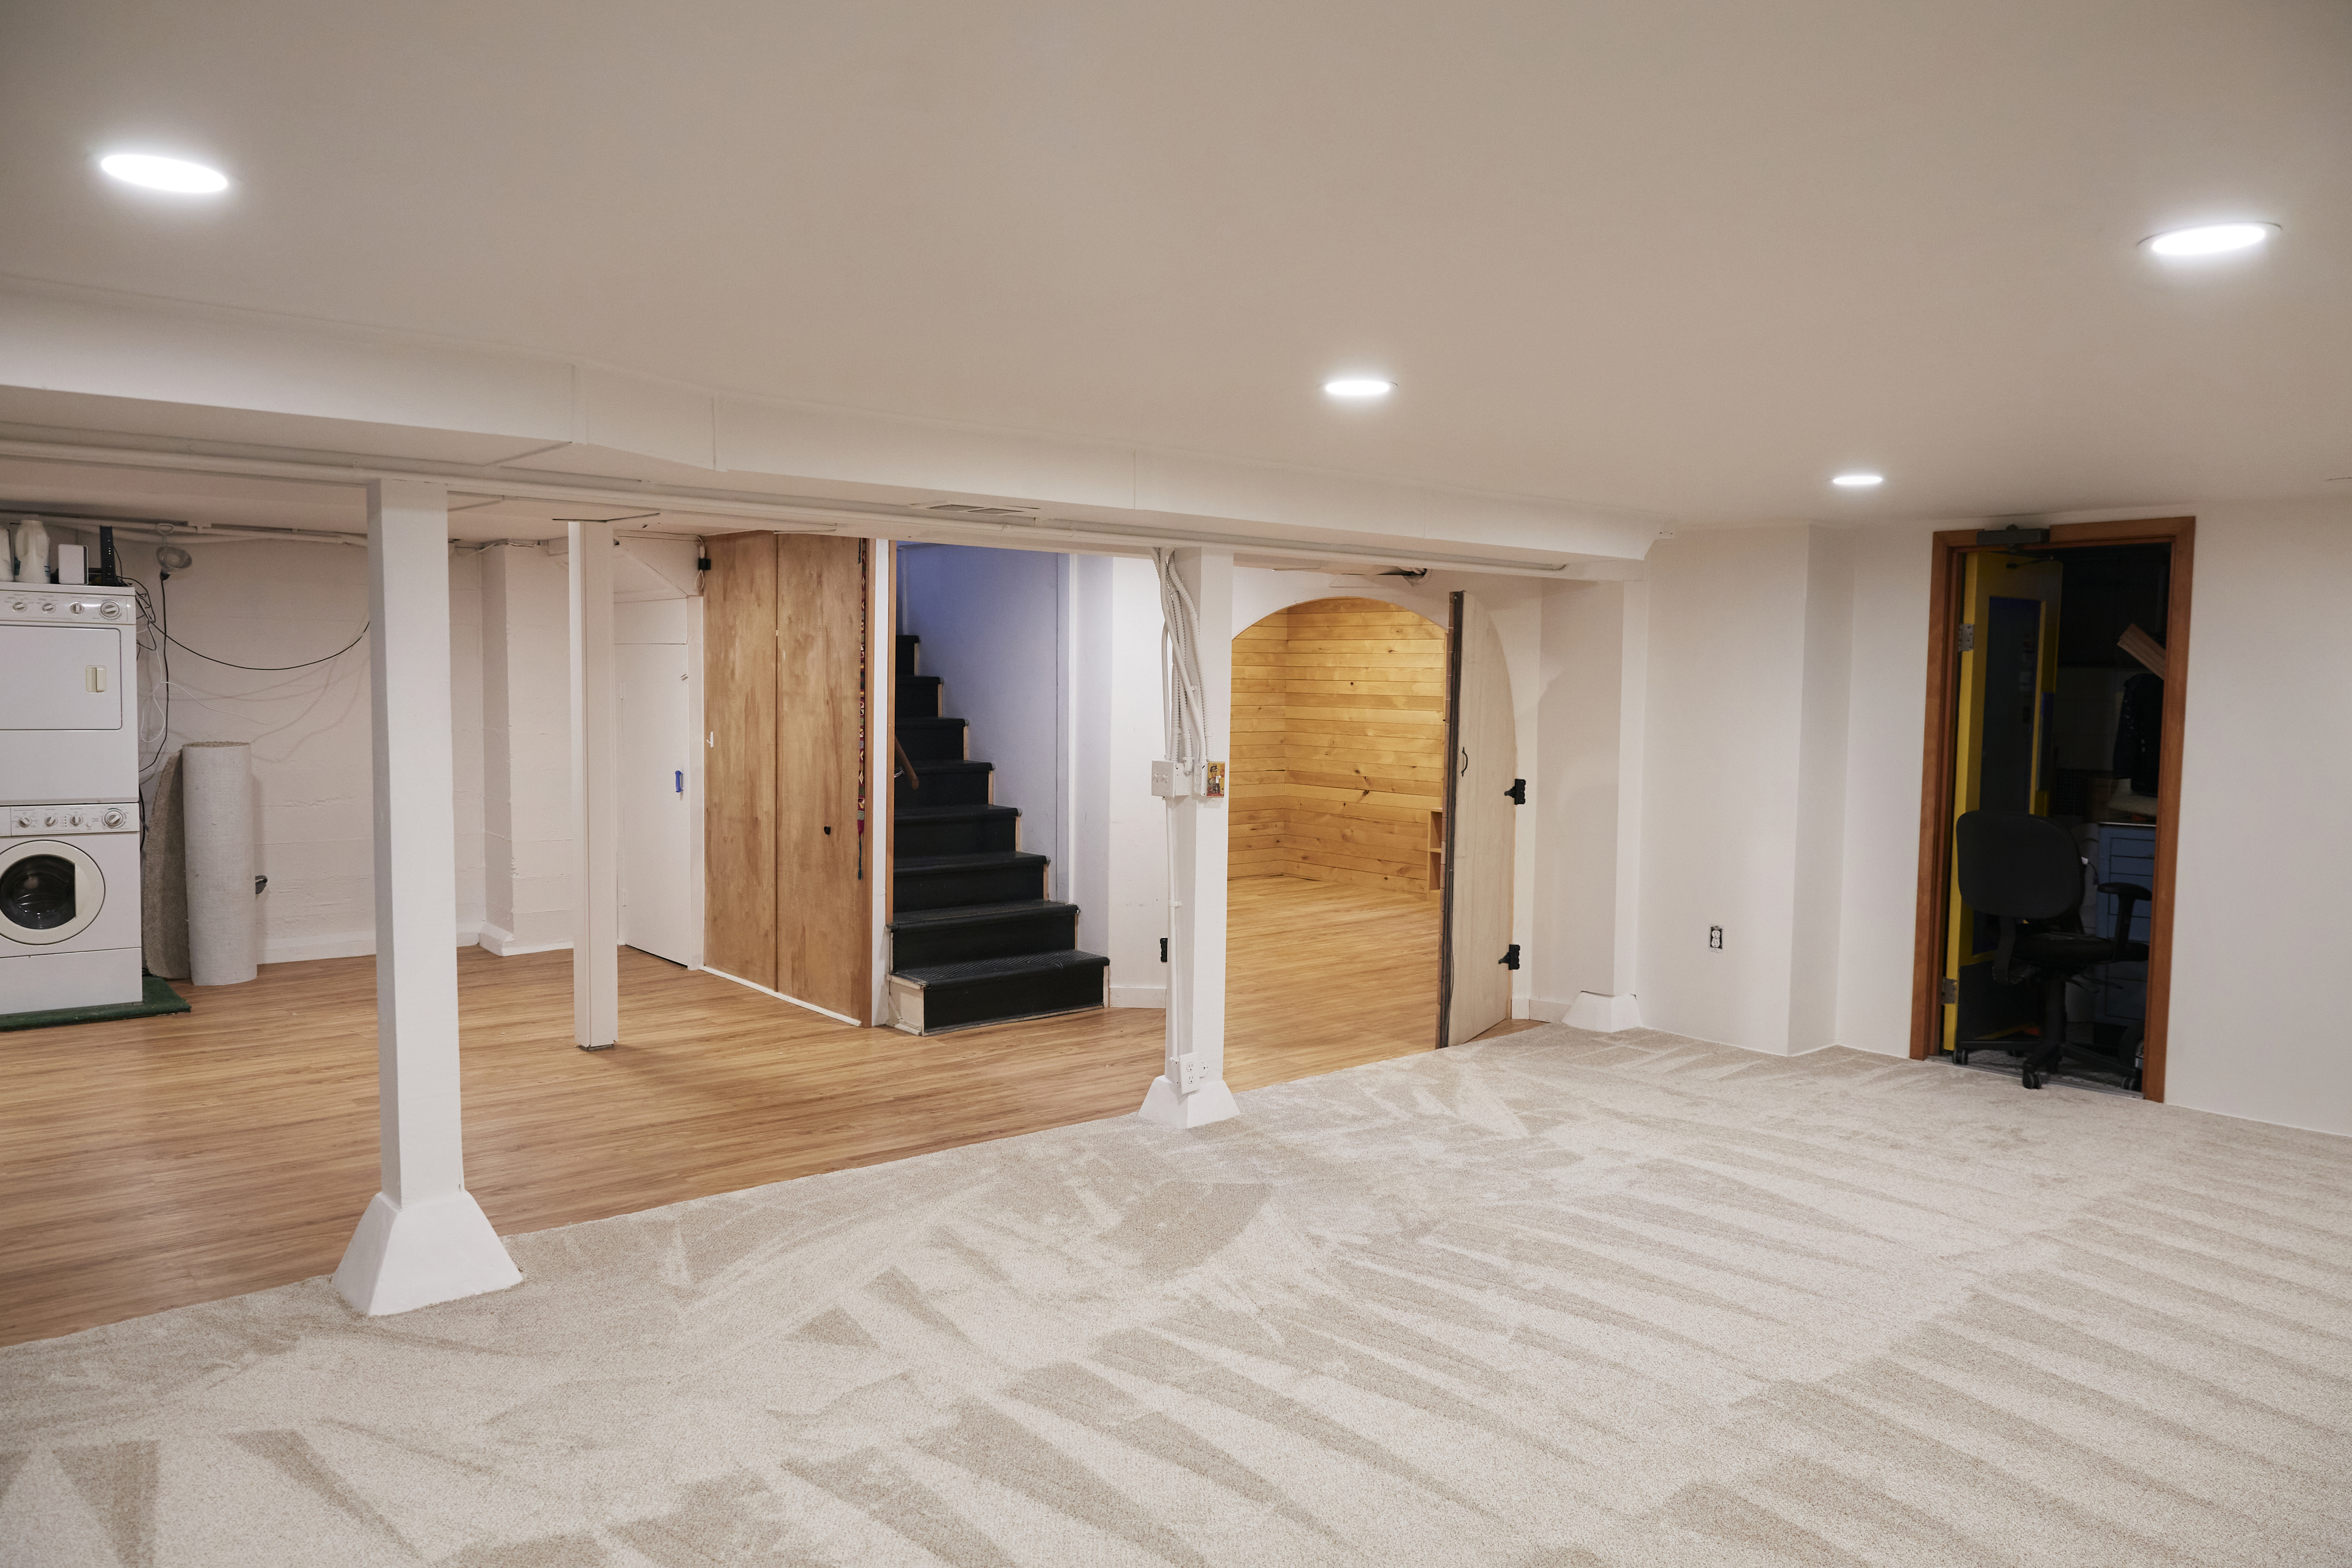 Basement interior with carpeted floors, white columns, laundry appliances, and a wooden staircase